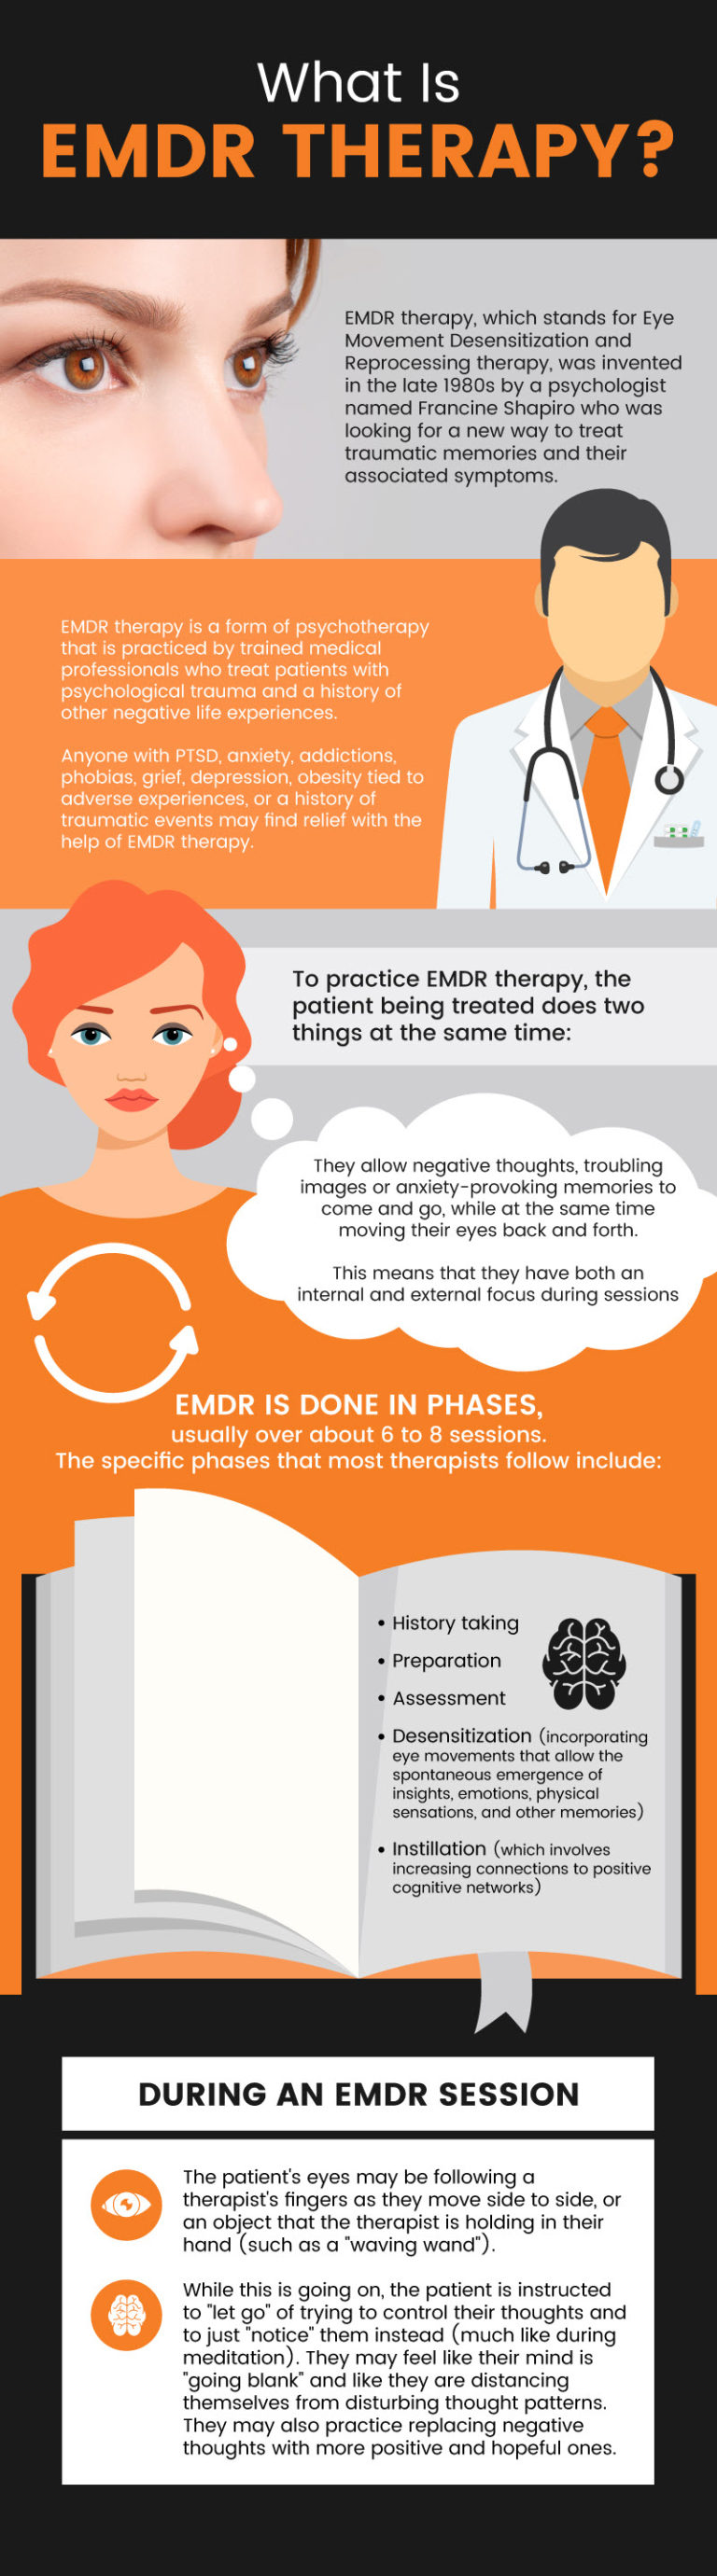 Emdr Therapy For Anxiety Ptsd And More 5 Potential Benefits